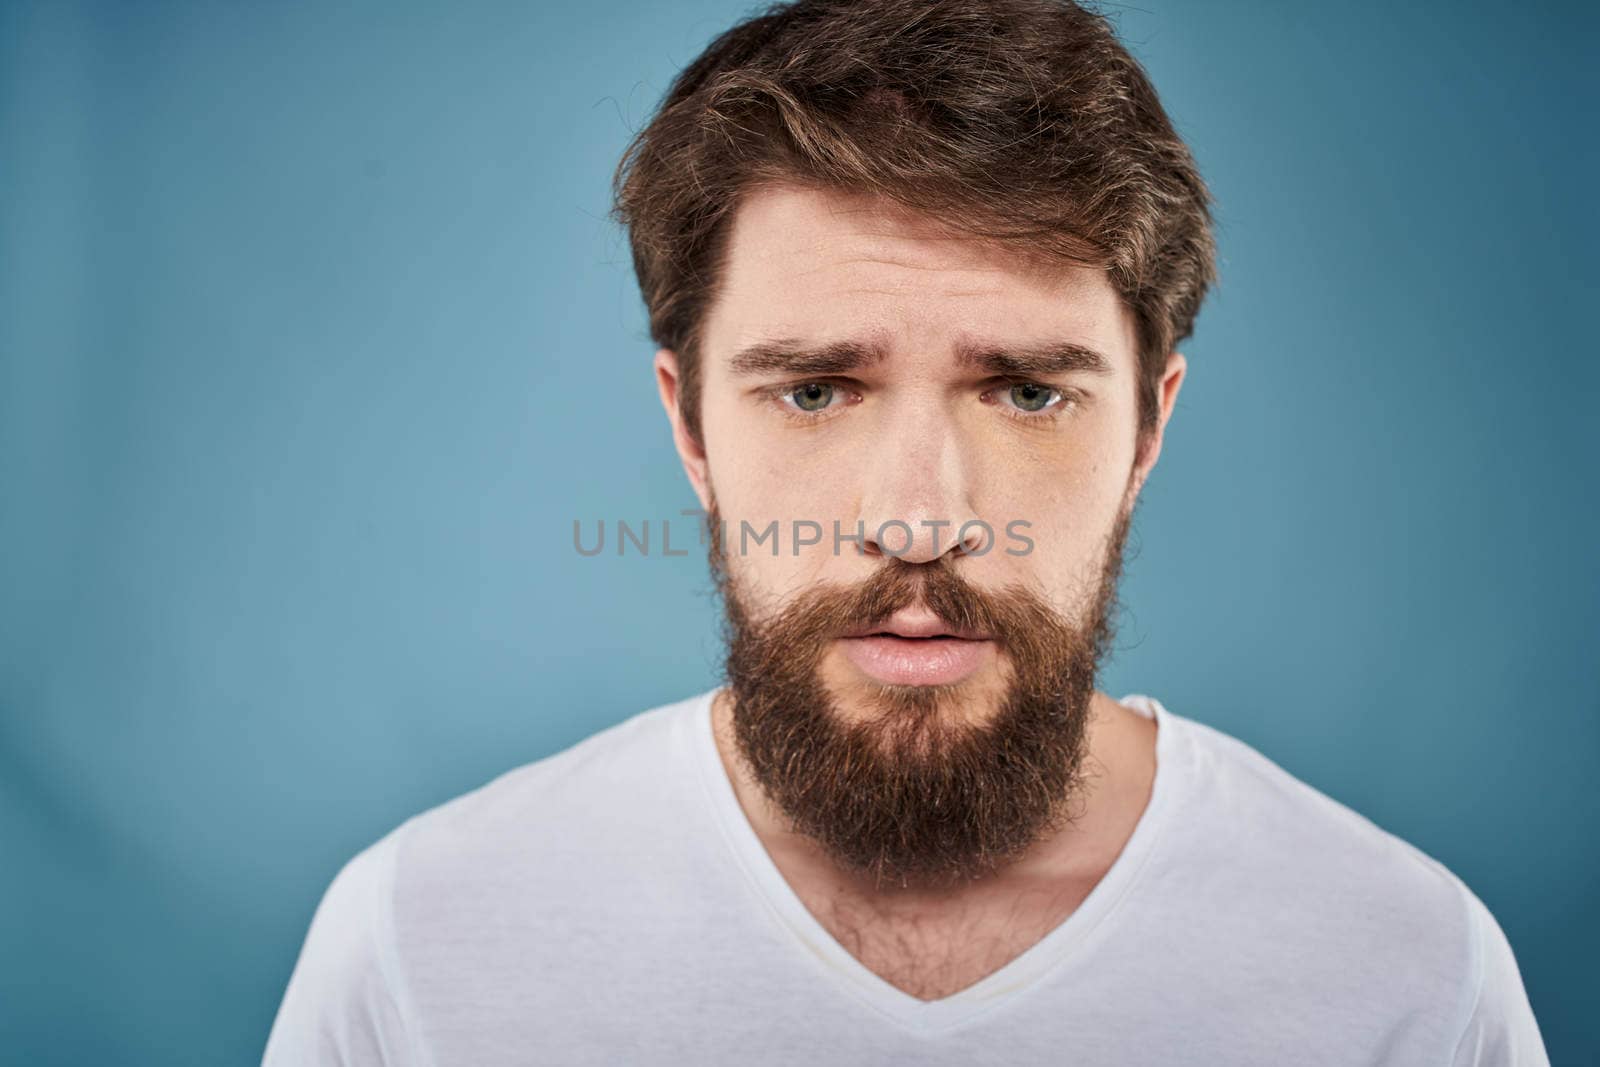 Bearded man displeased facial expression emotions close-up blue background white t-shirt by SHOTPRIME